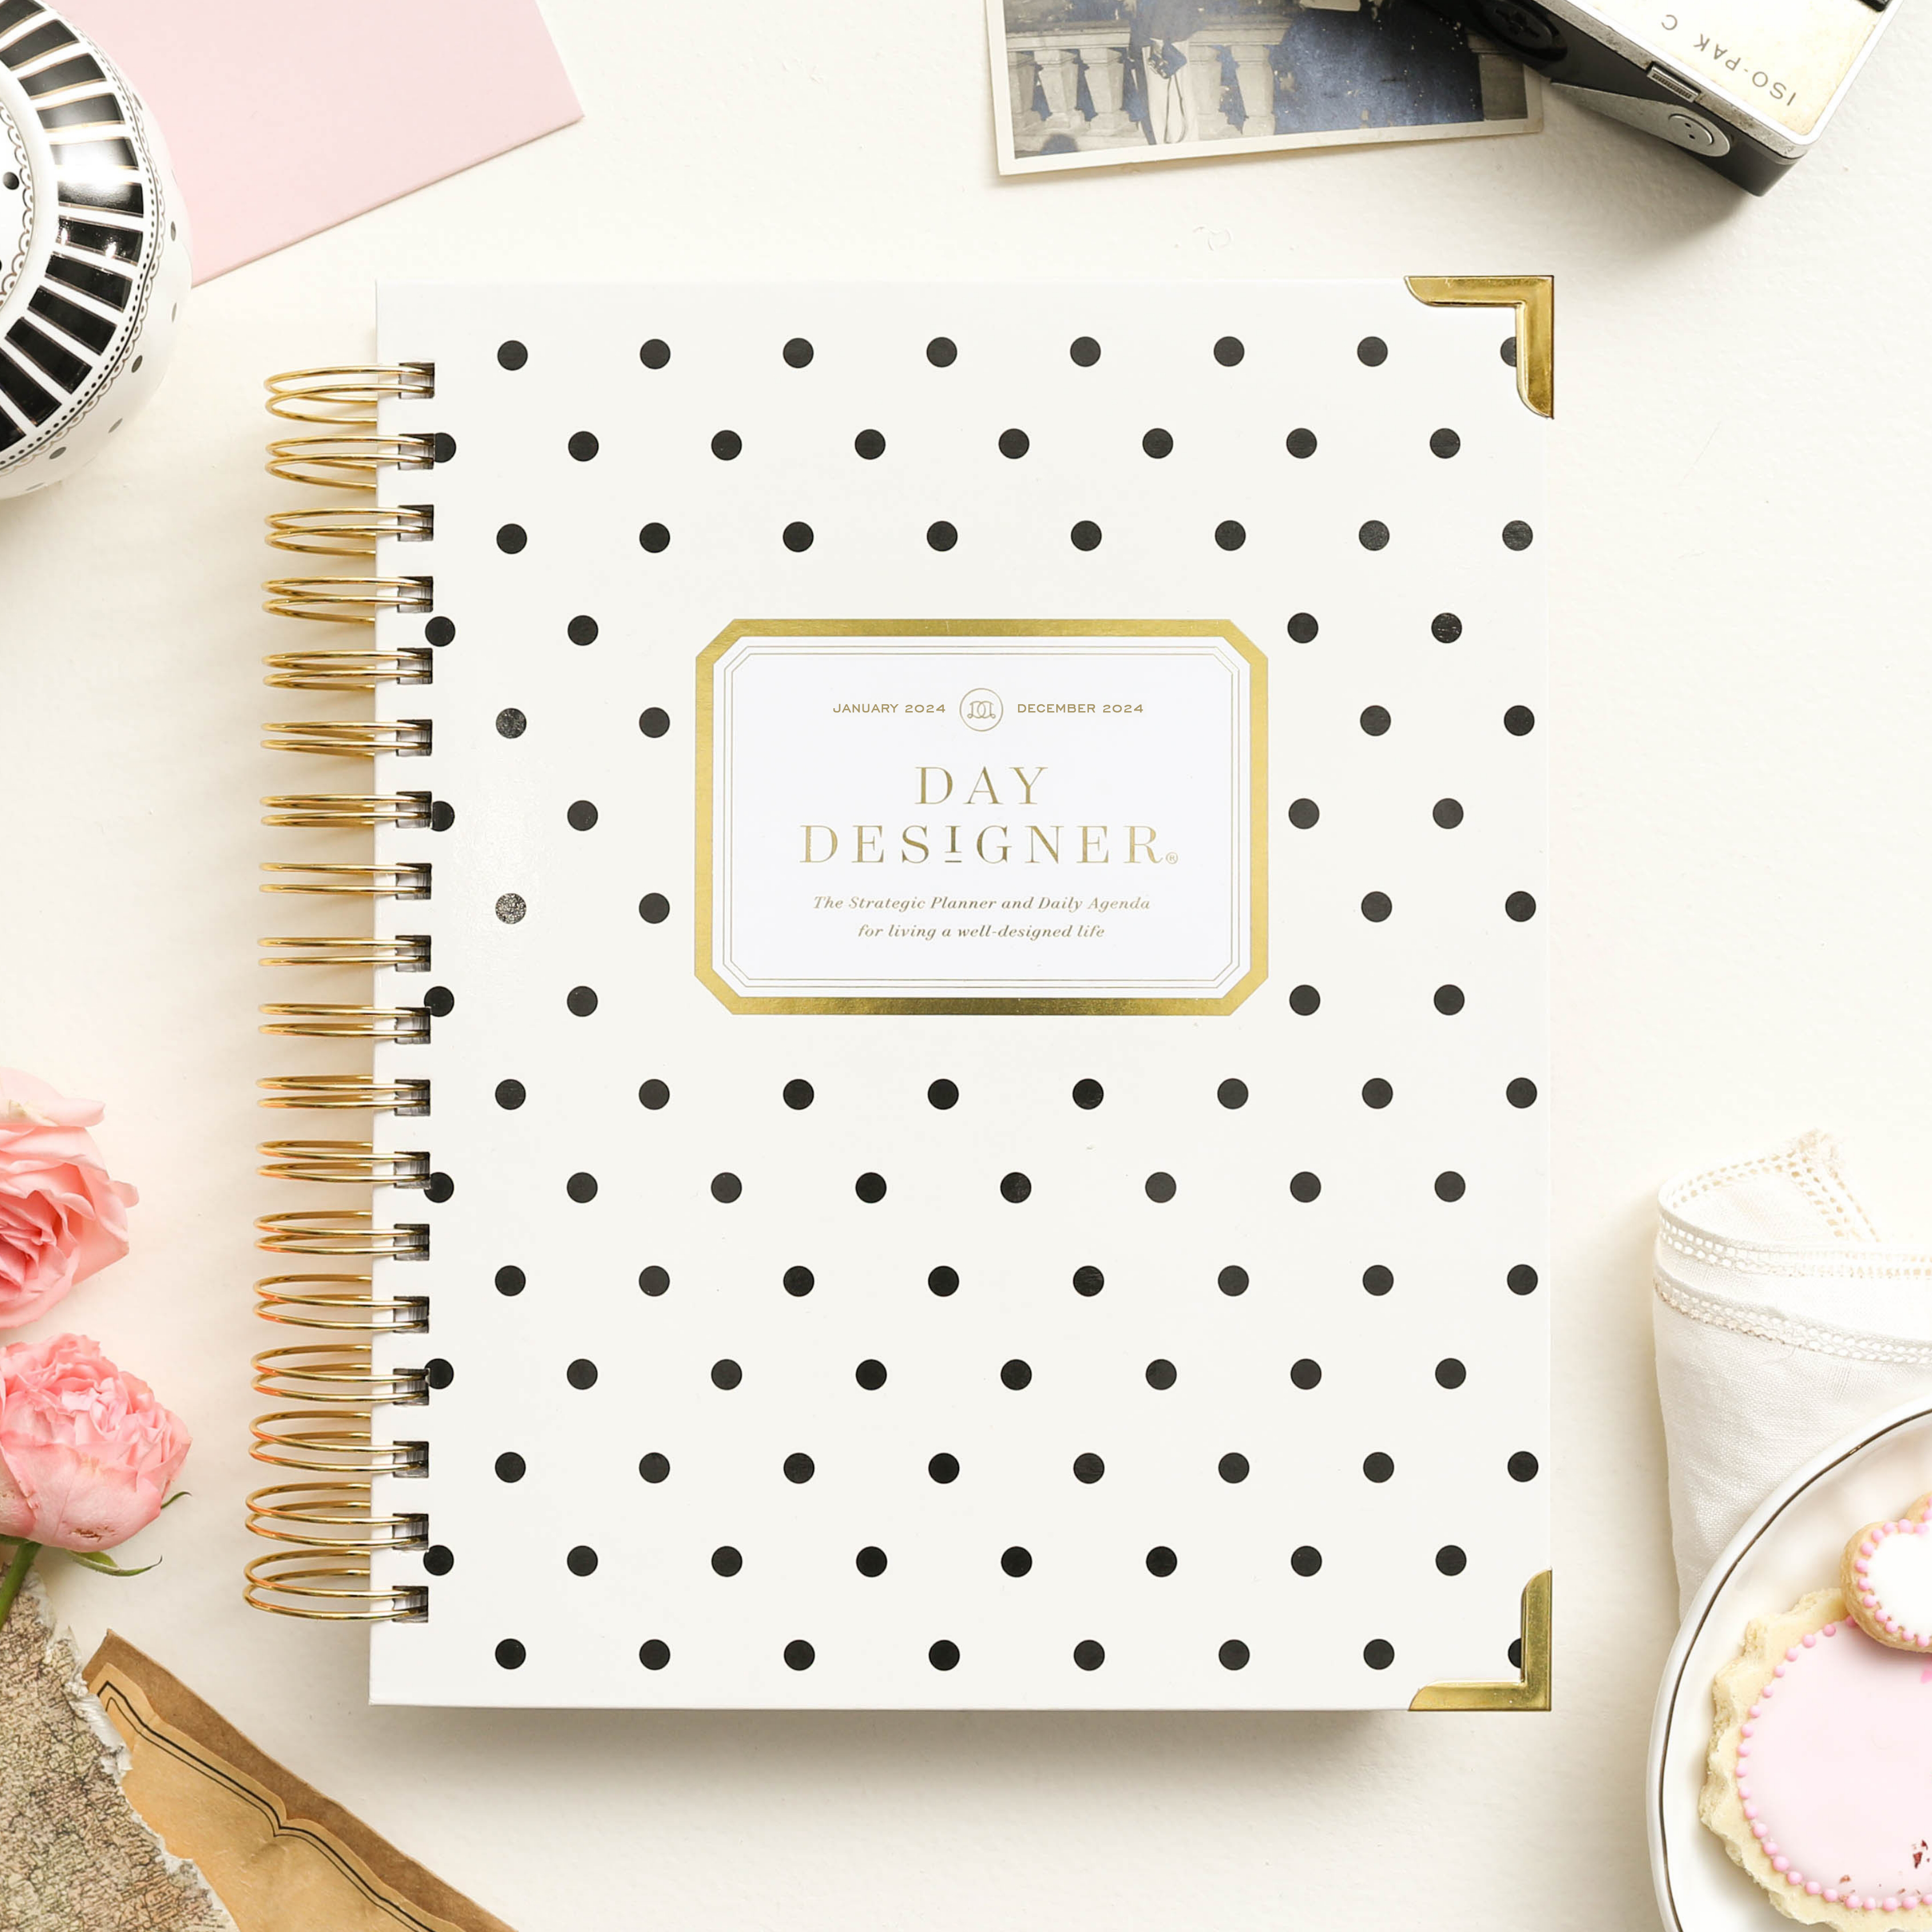 Dot Journaling—A Practical Guide: How to Start and Keep the Planner, To-Do List, and Diary That’ll Actually Help You Get Your Life Together [Book]